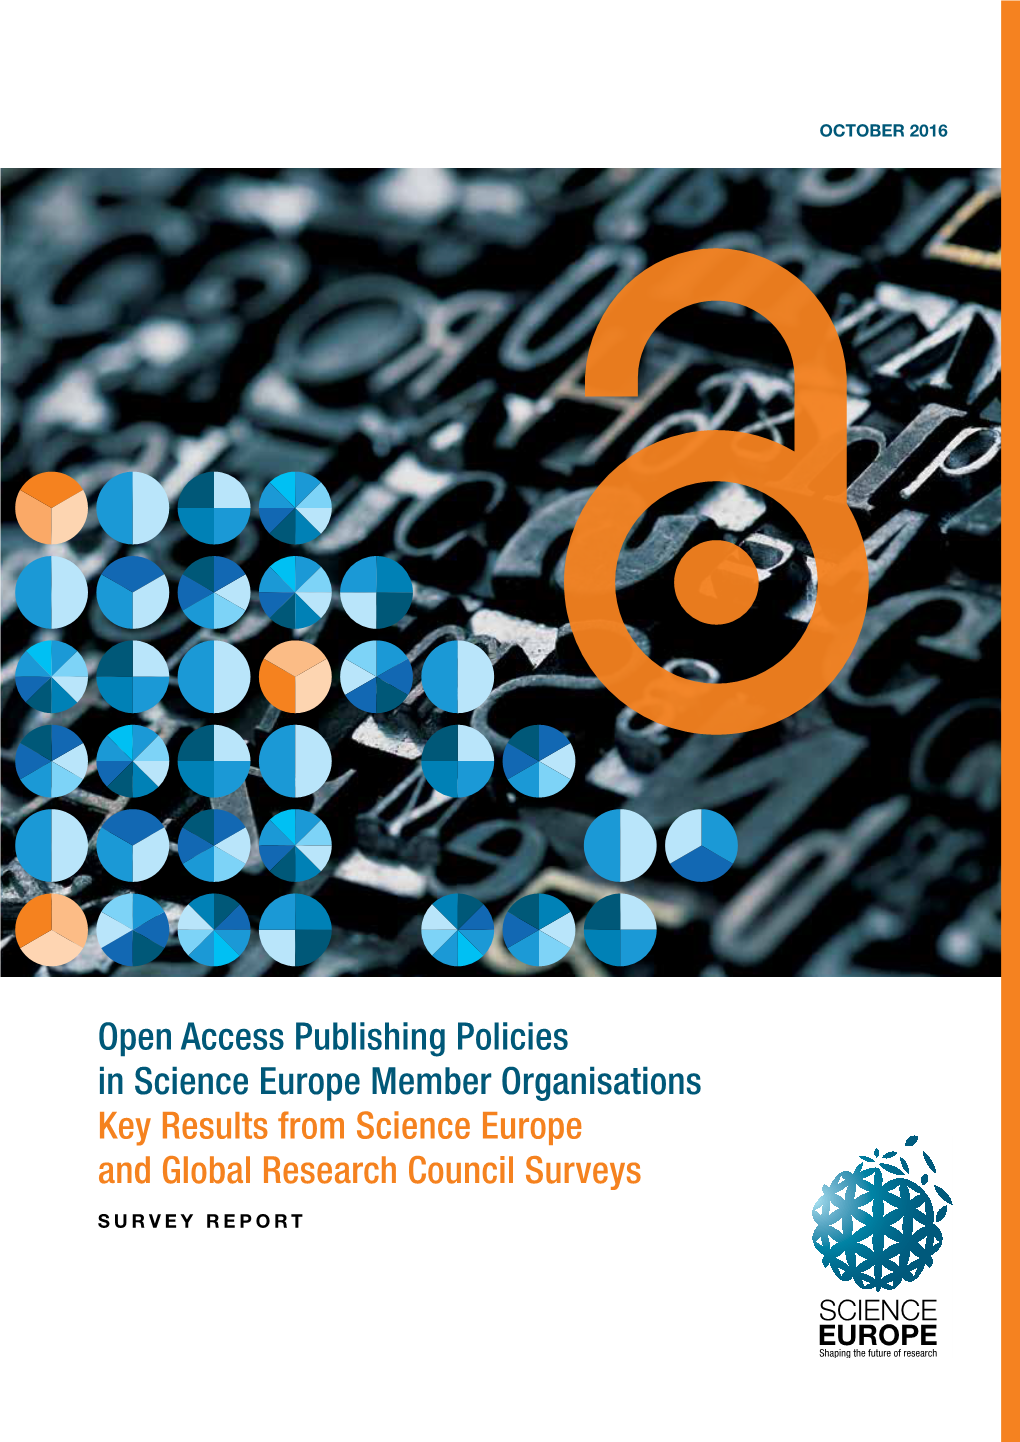 Open Access Publishing Policies in Science Europe Member Organisations Key Results from Science Europe and Global Research Council Surveys